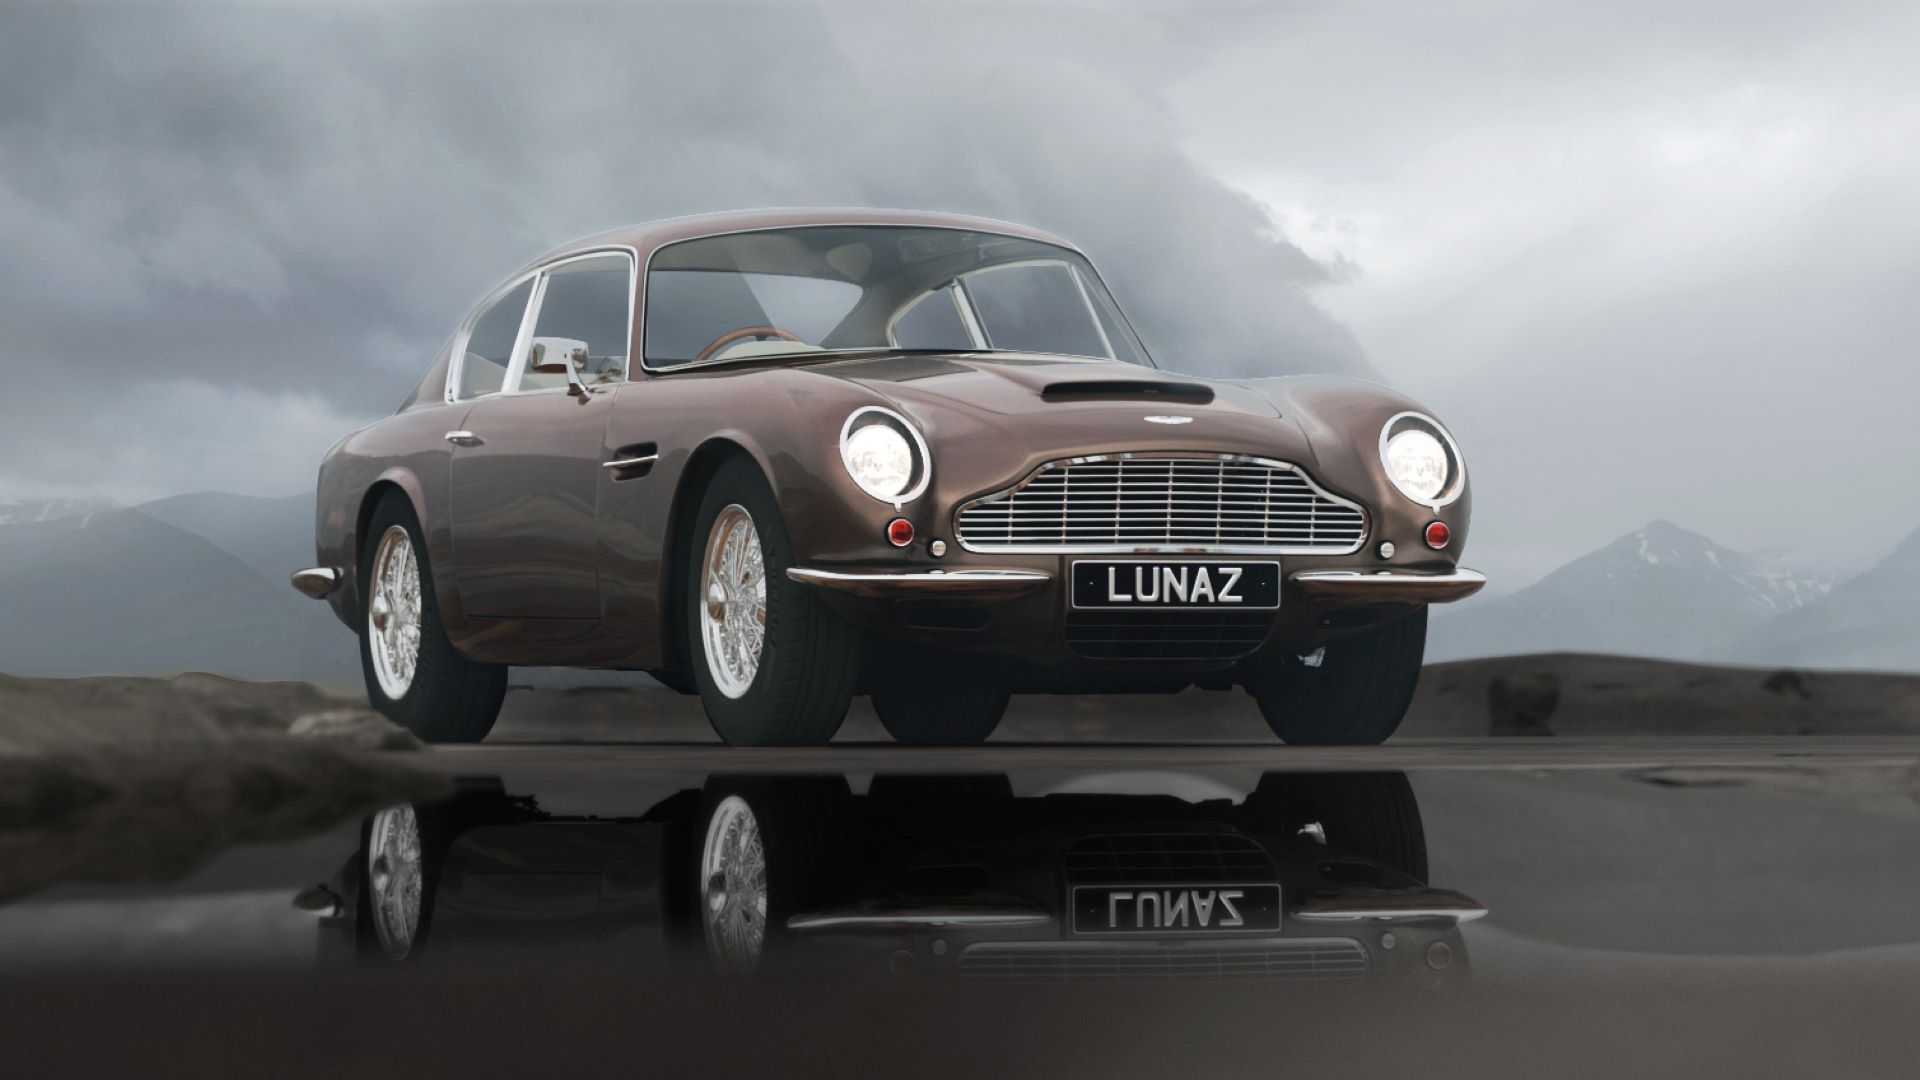 Lunaz reveals concept for the most sustainable Aston Martin ever created